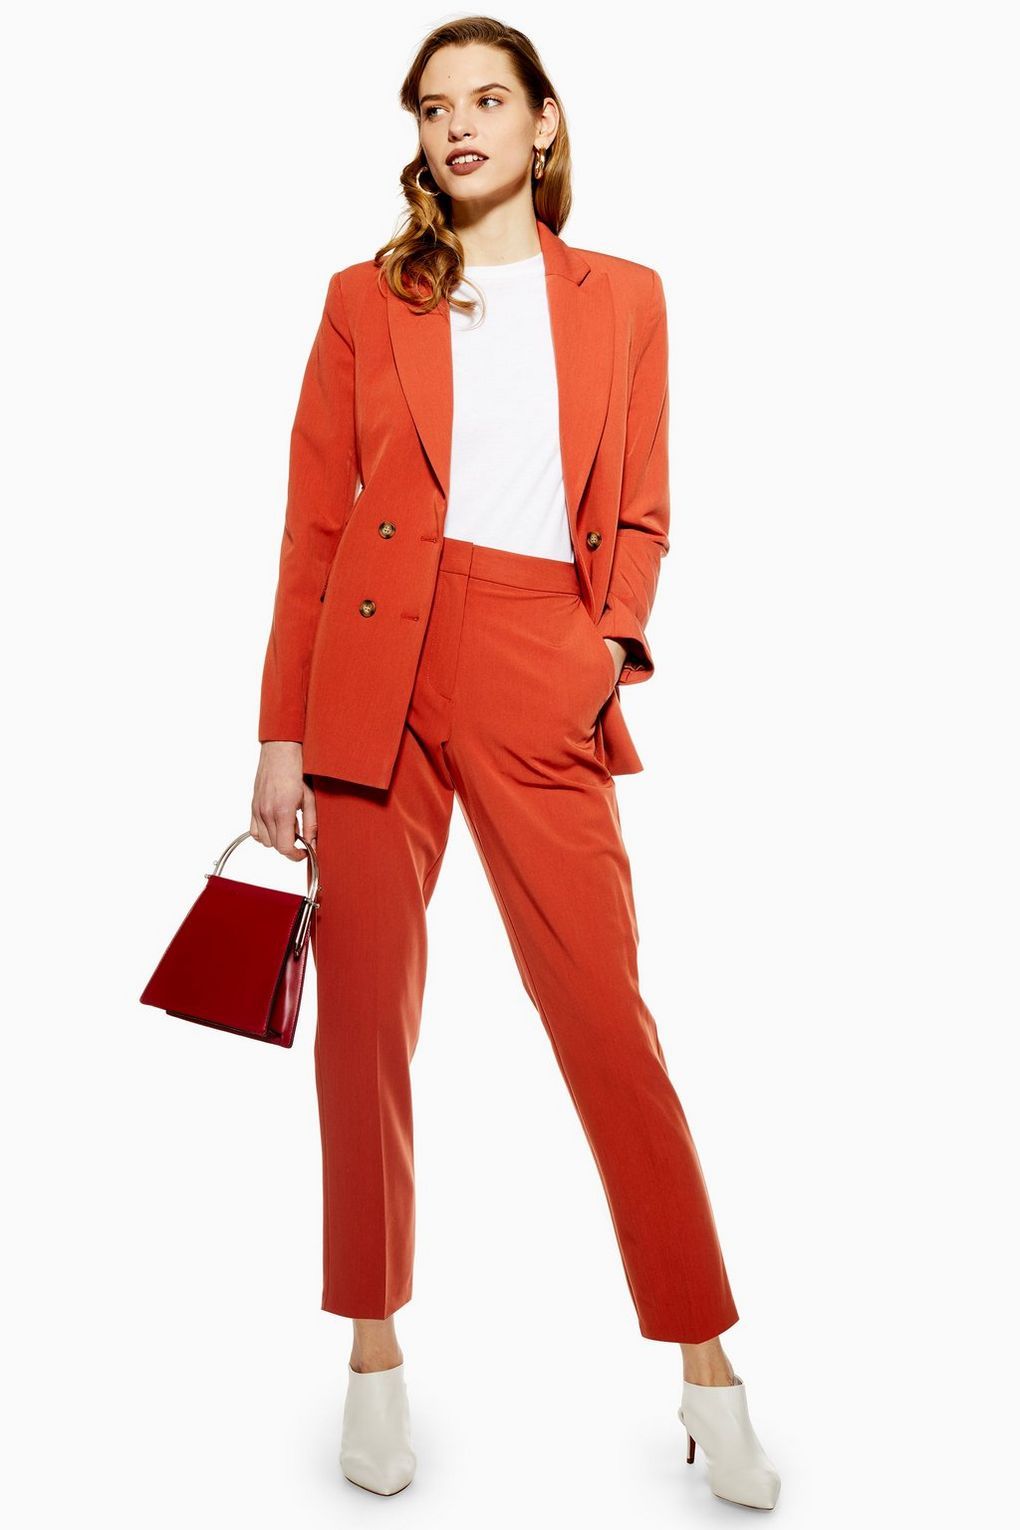 9 Fashion Trends to Wear to Work This Summer | Who What Wear